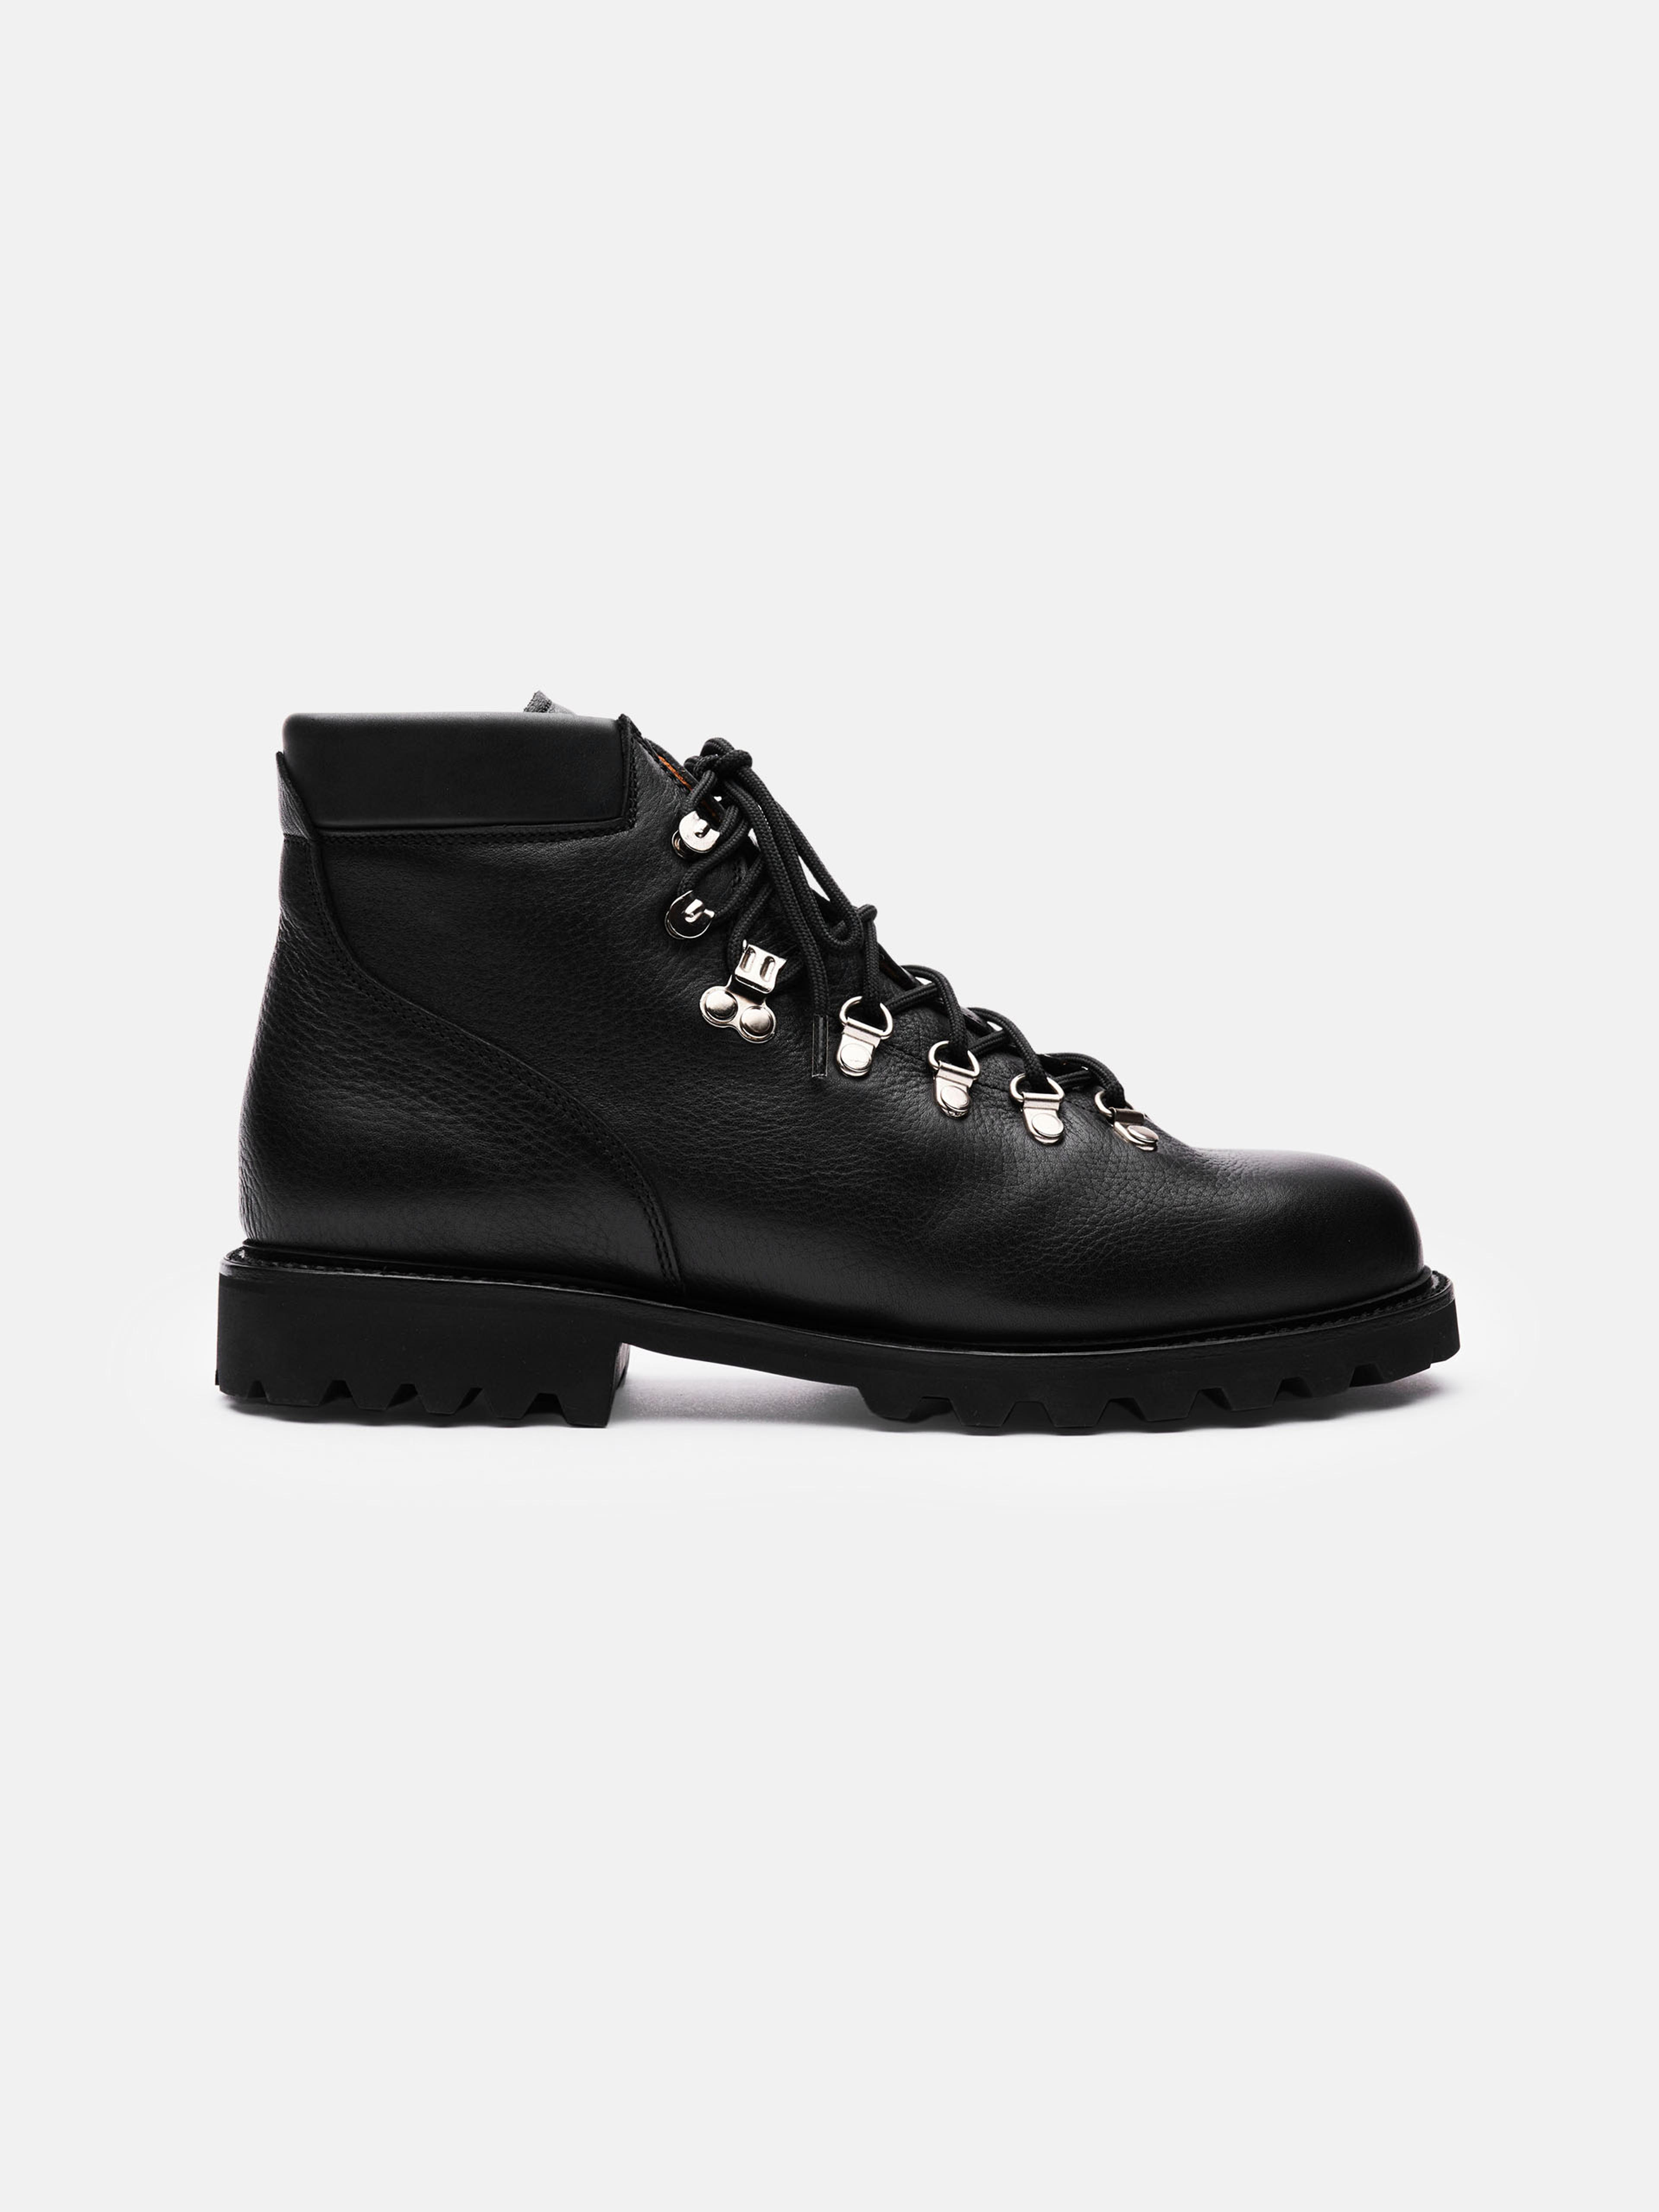 The Hiking Boot - Black Grain | Goodyear Welted | MORJAS